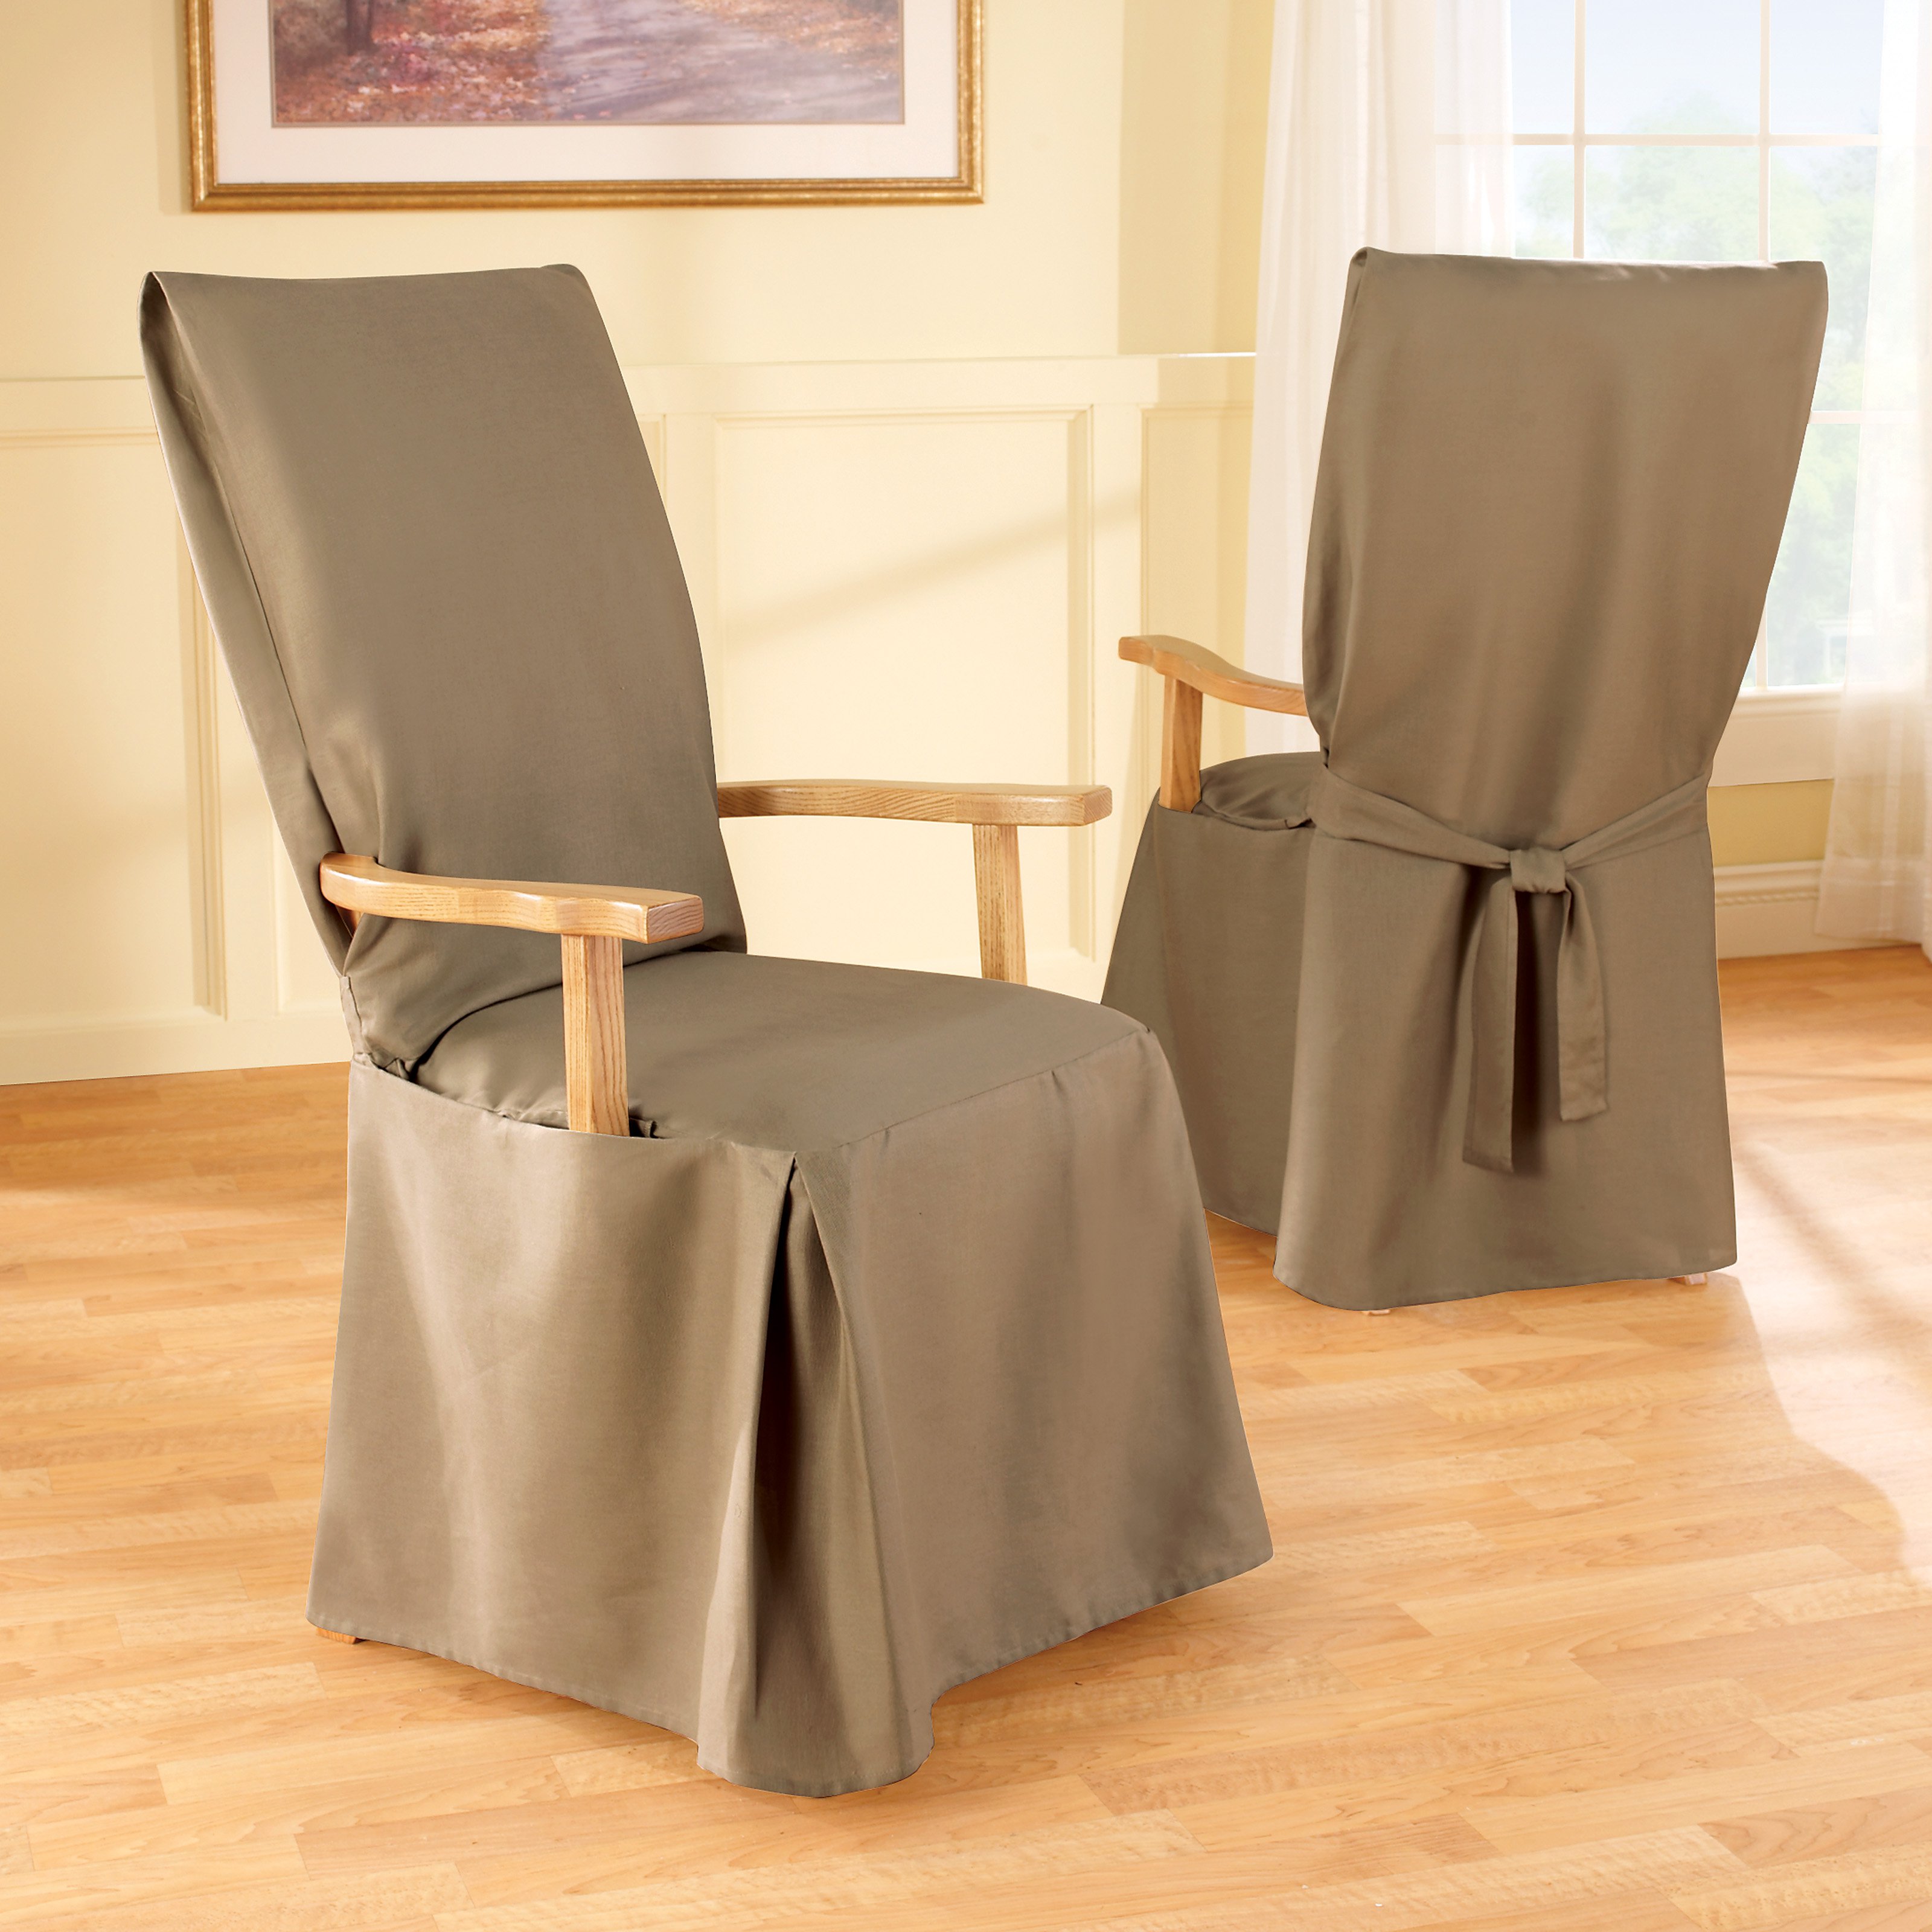 dining room chair cushion covers photo - 1